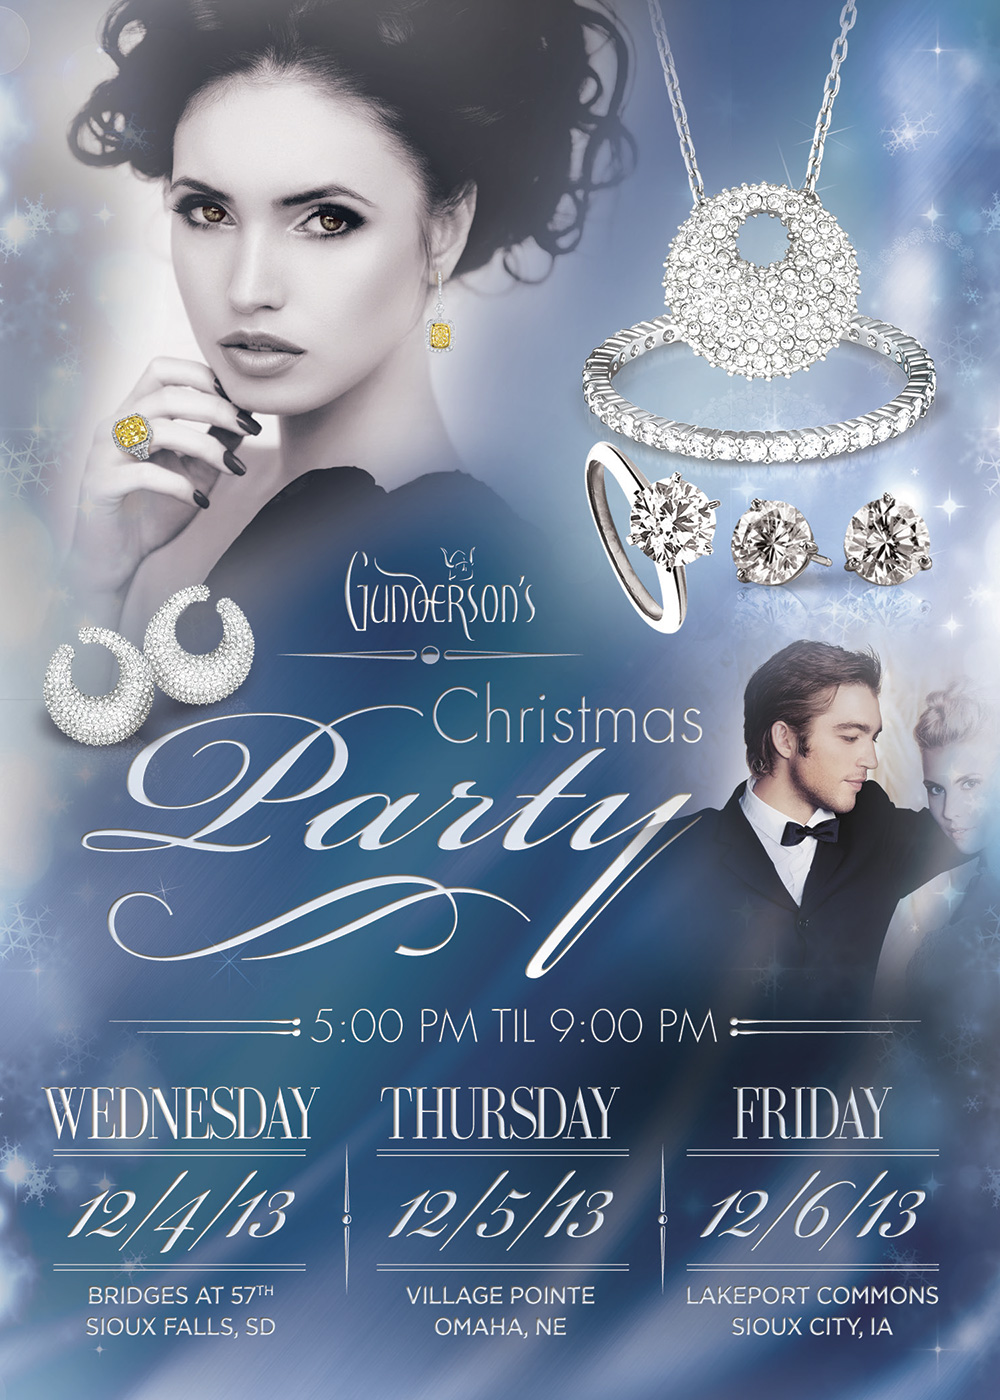 These Jeweler Direct Mail Samples Shine Bright for the Holidays